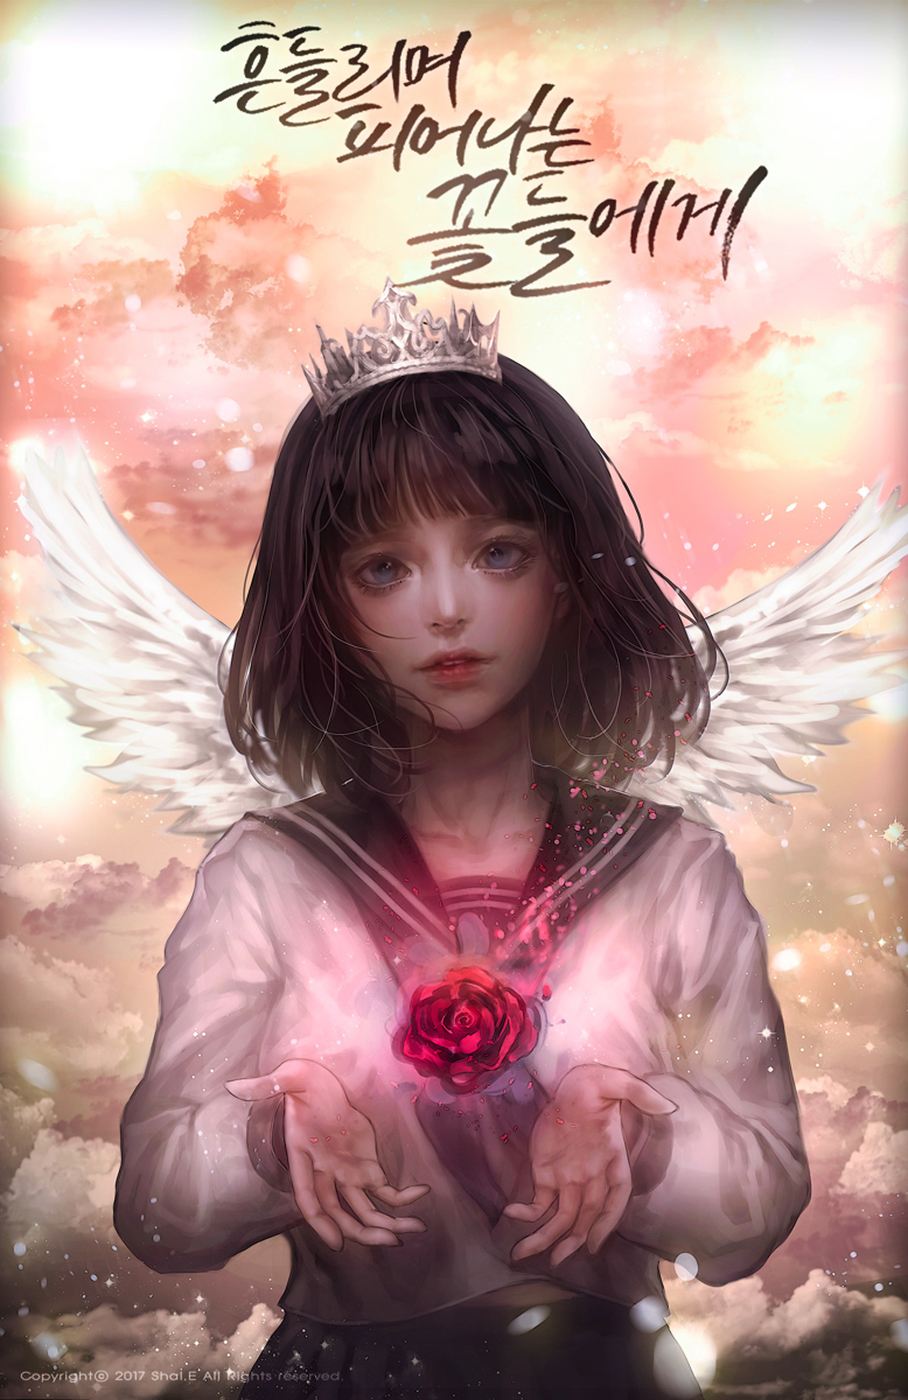 anime girl with angel wings and brown hair